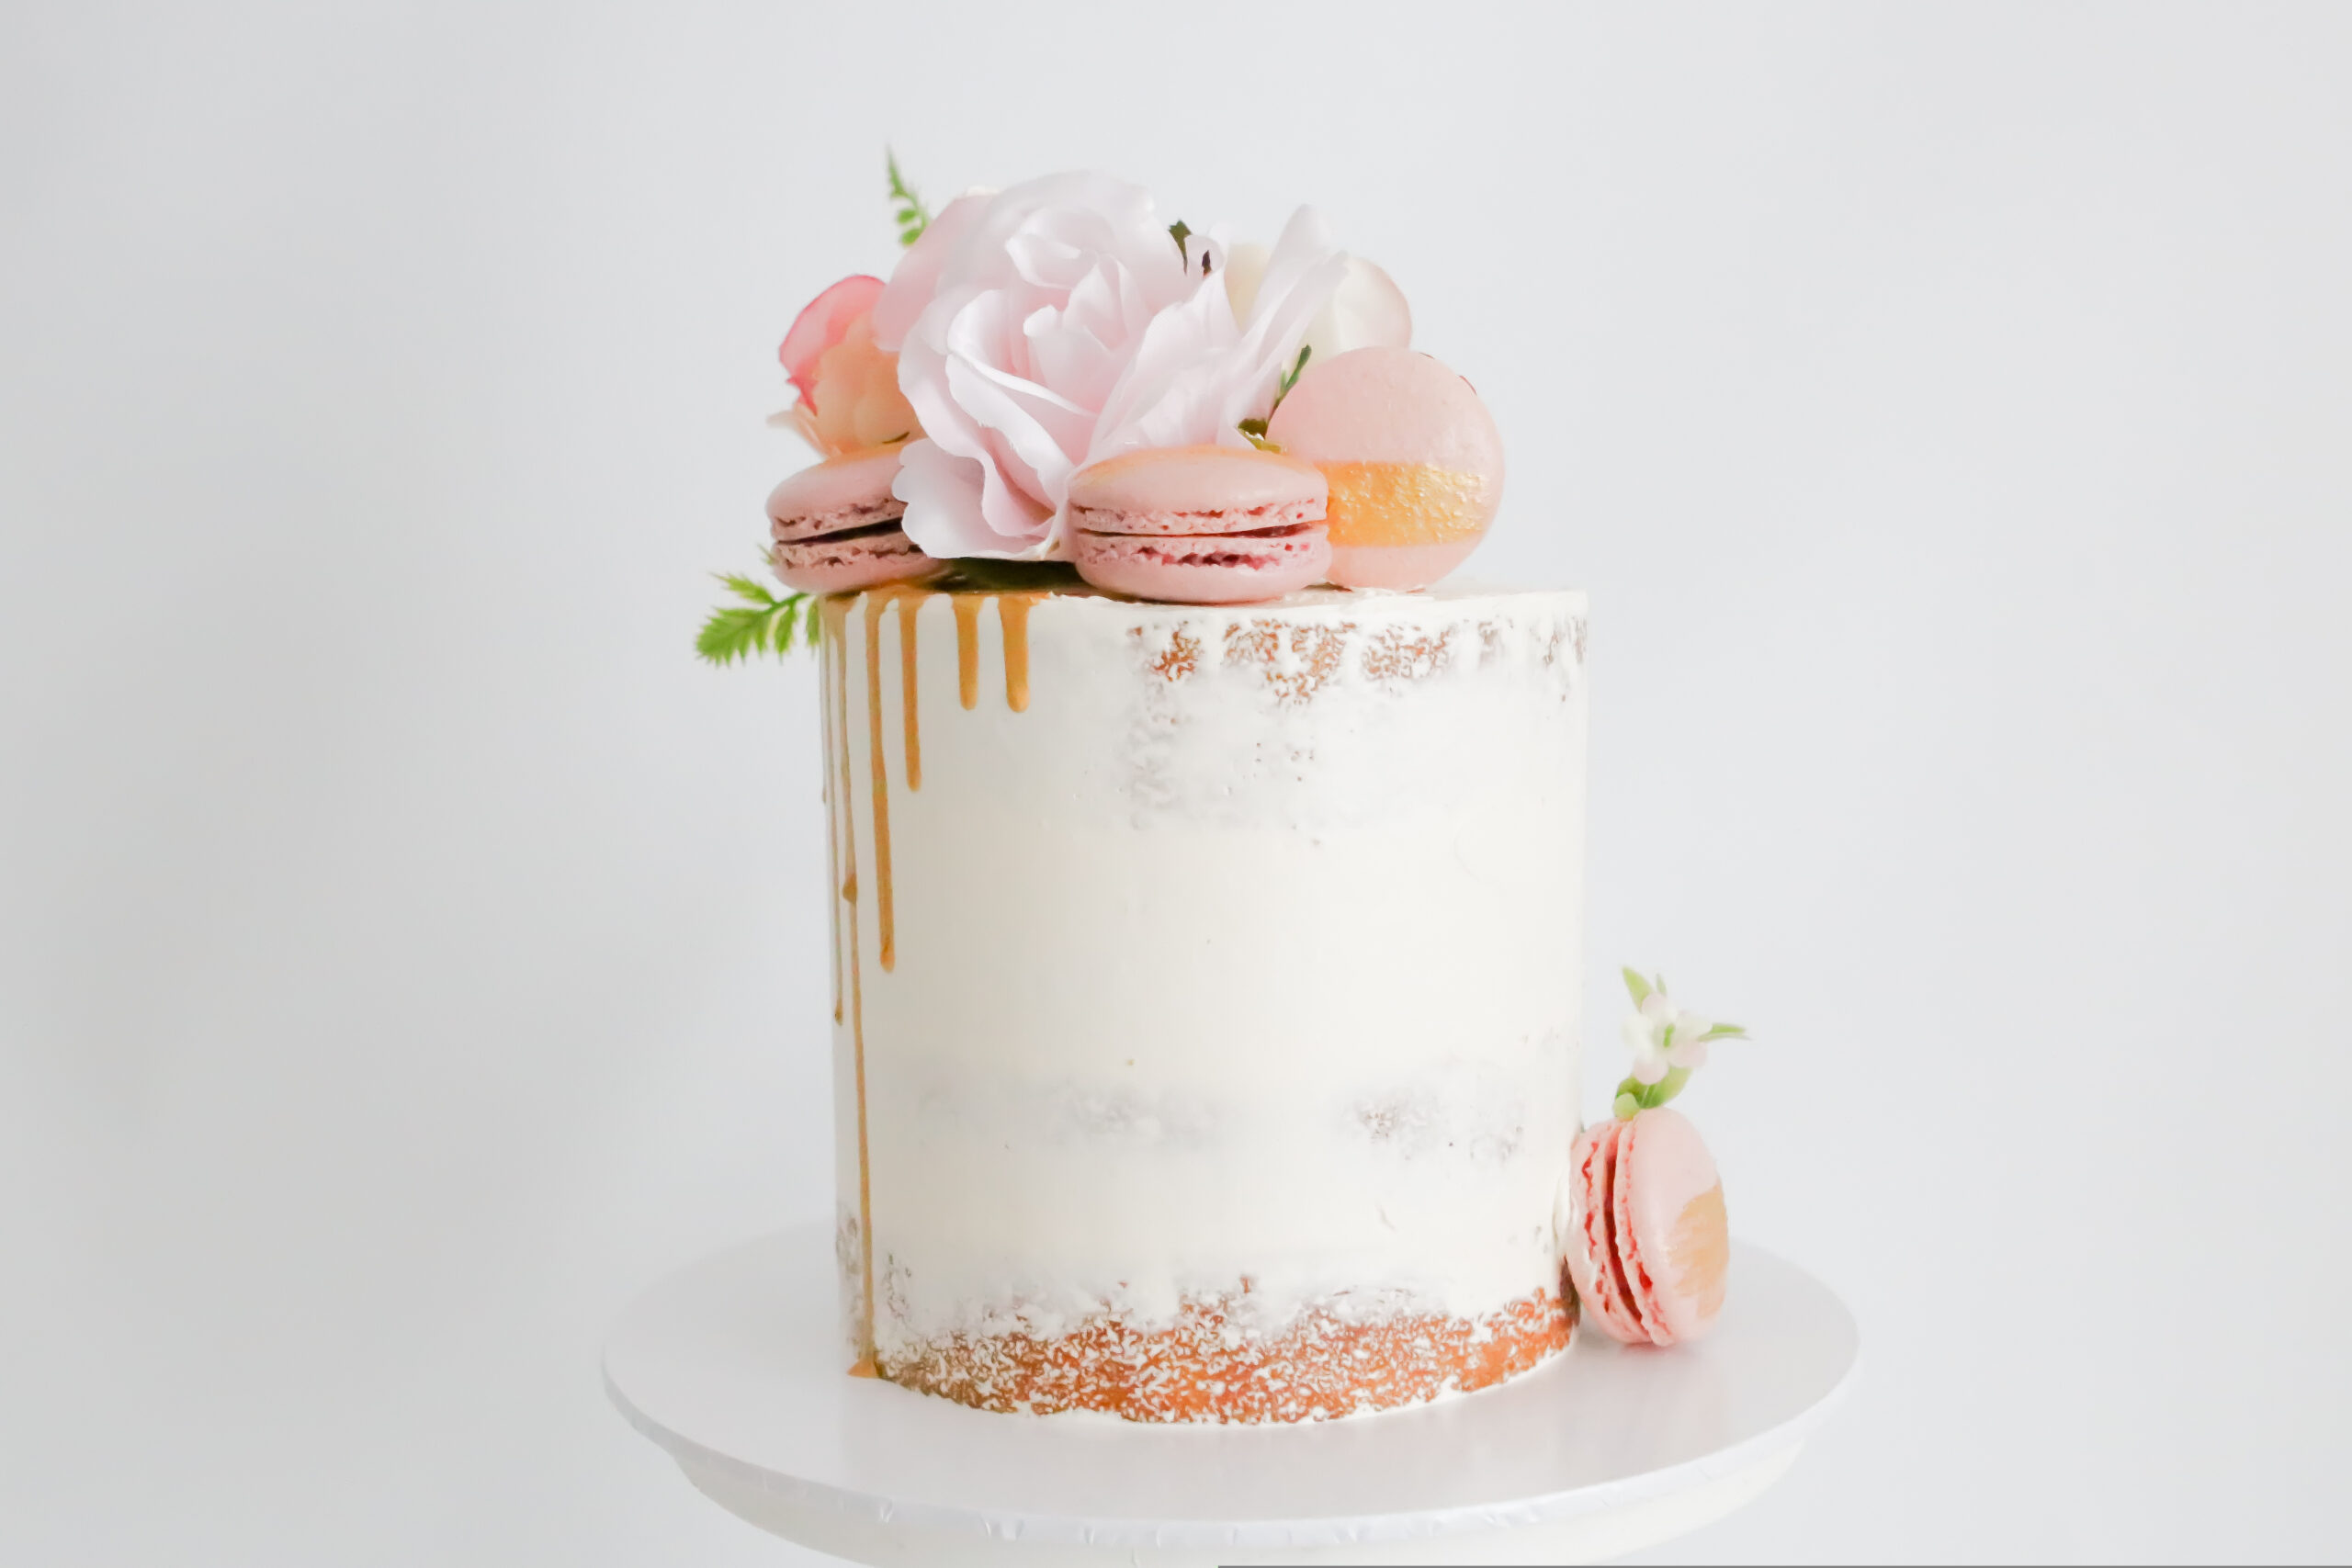 Layer cake - Semi-naked macarons and flowers -